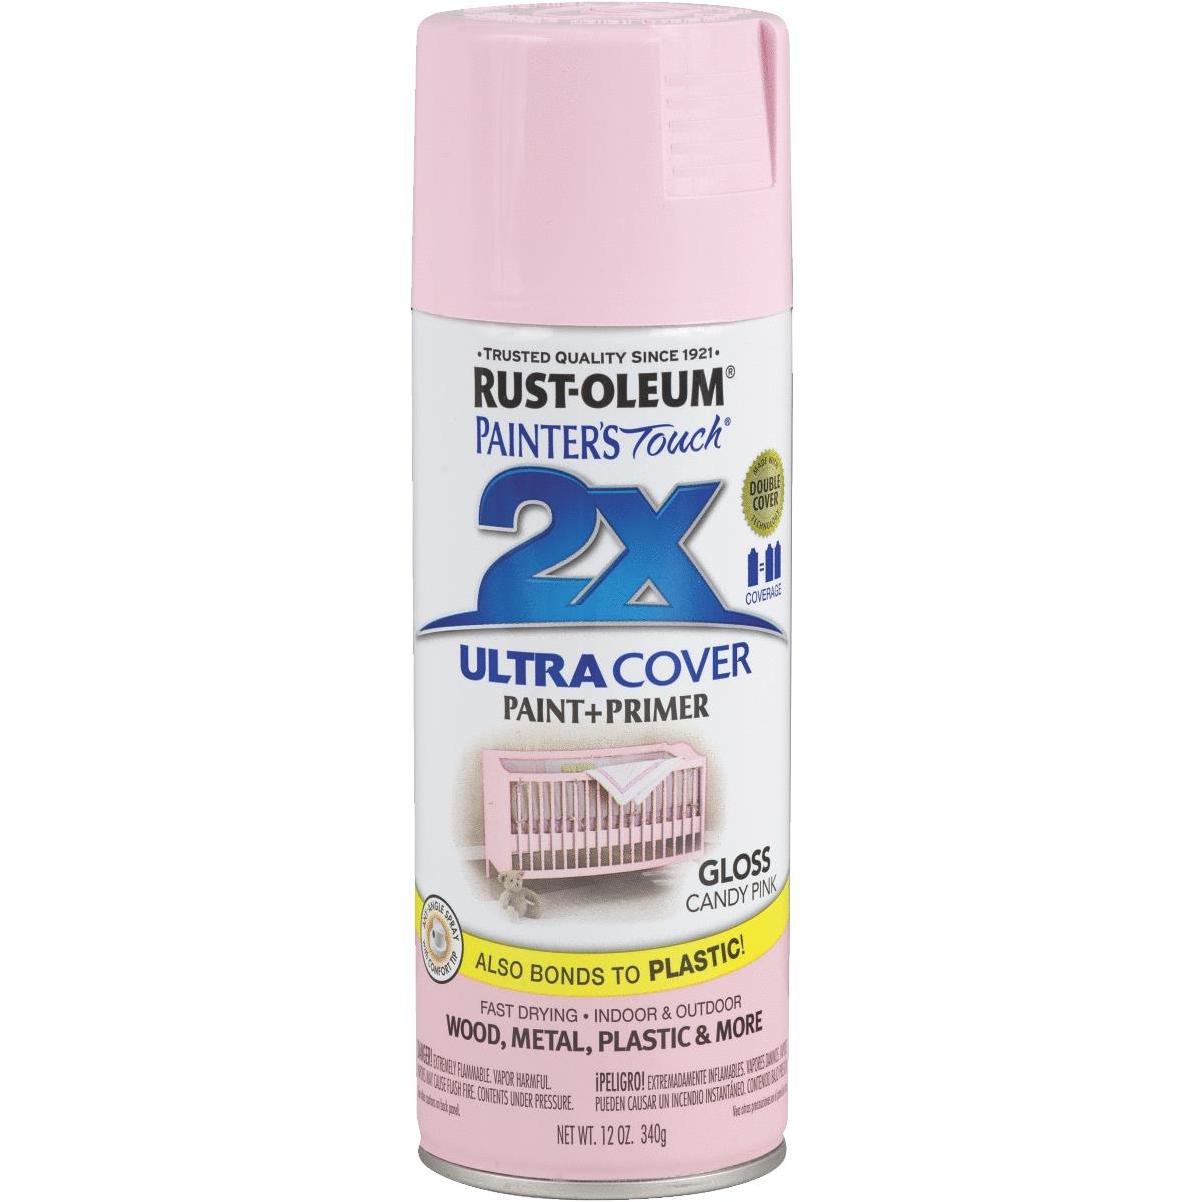 Rust-Oleum Painter's Touch 2X Ultra Cover Gloss Candy Pink Paint+Primer  Spray Paint 12 oz